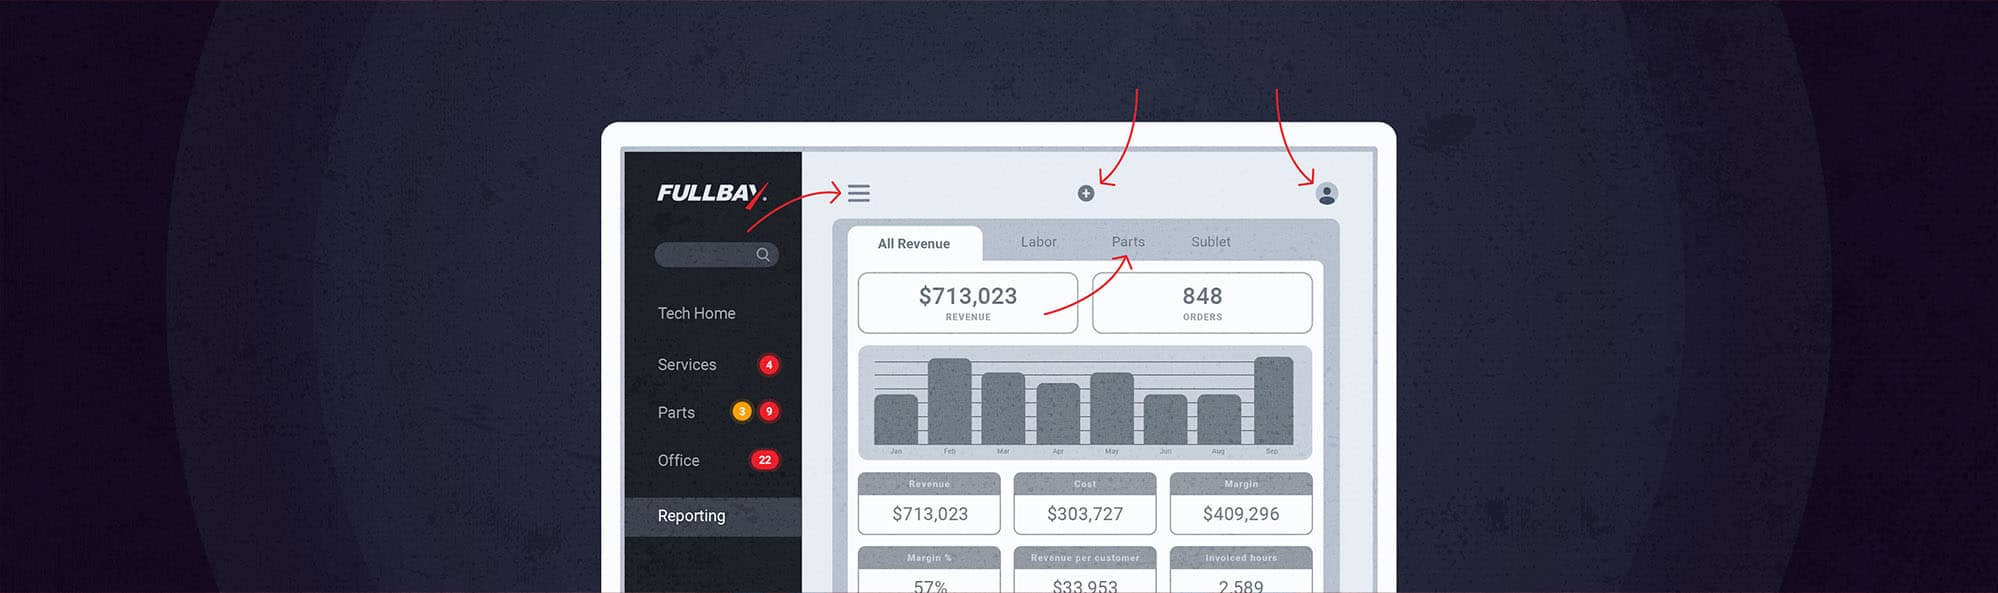 13 Ways Fullbay Can Supercharge Your Shop